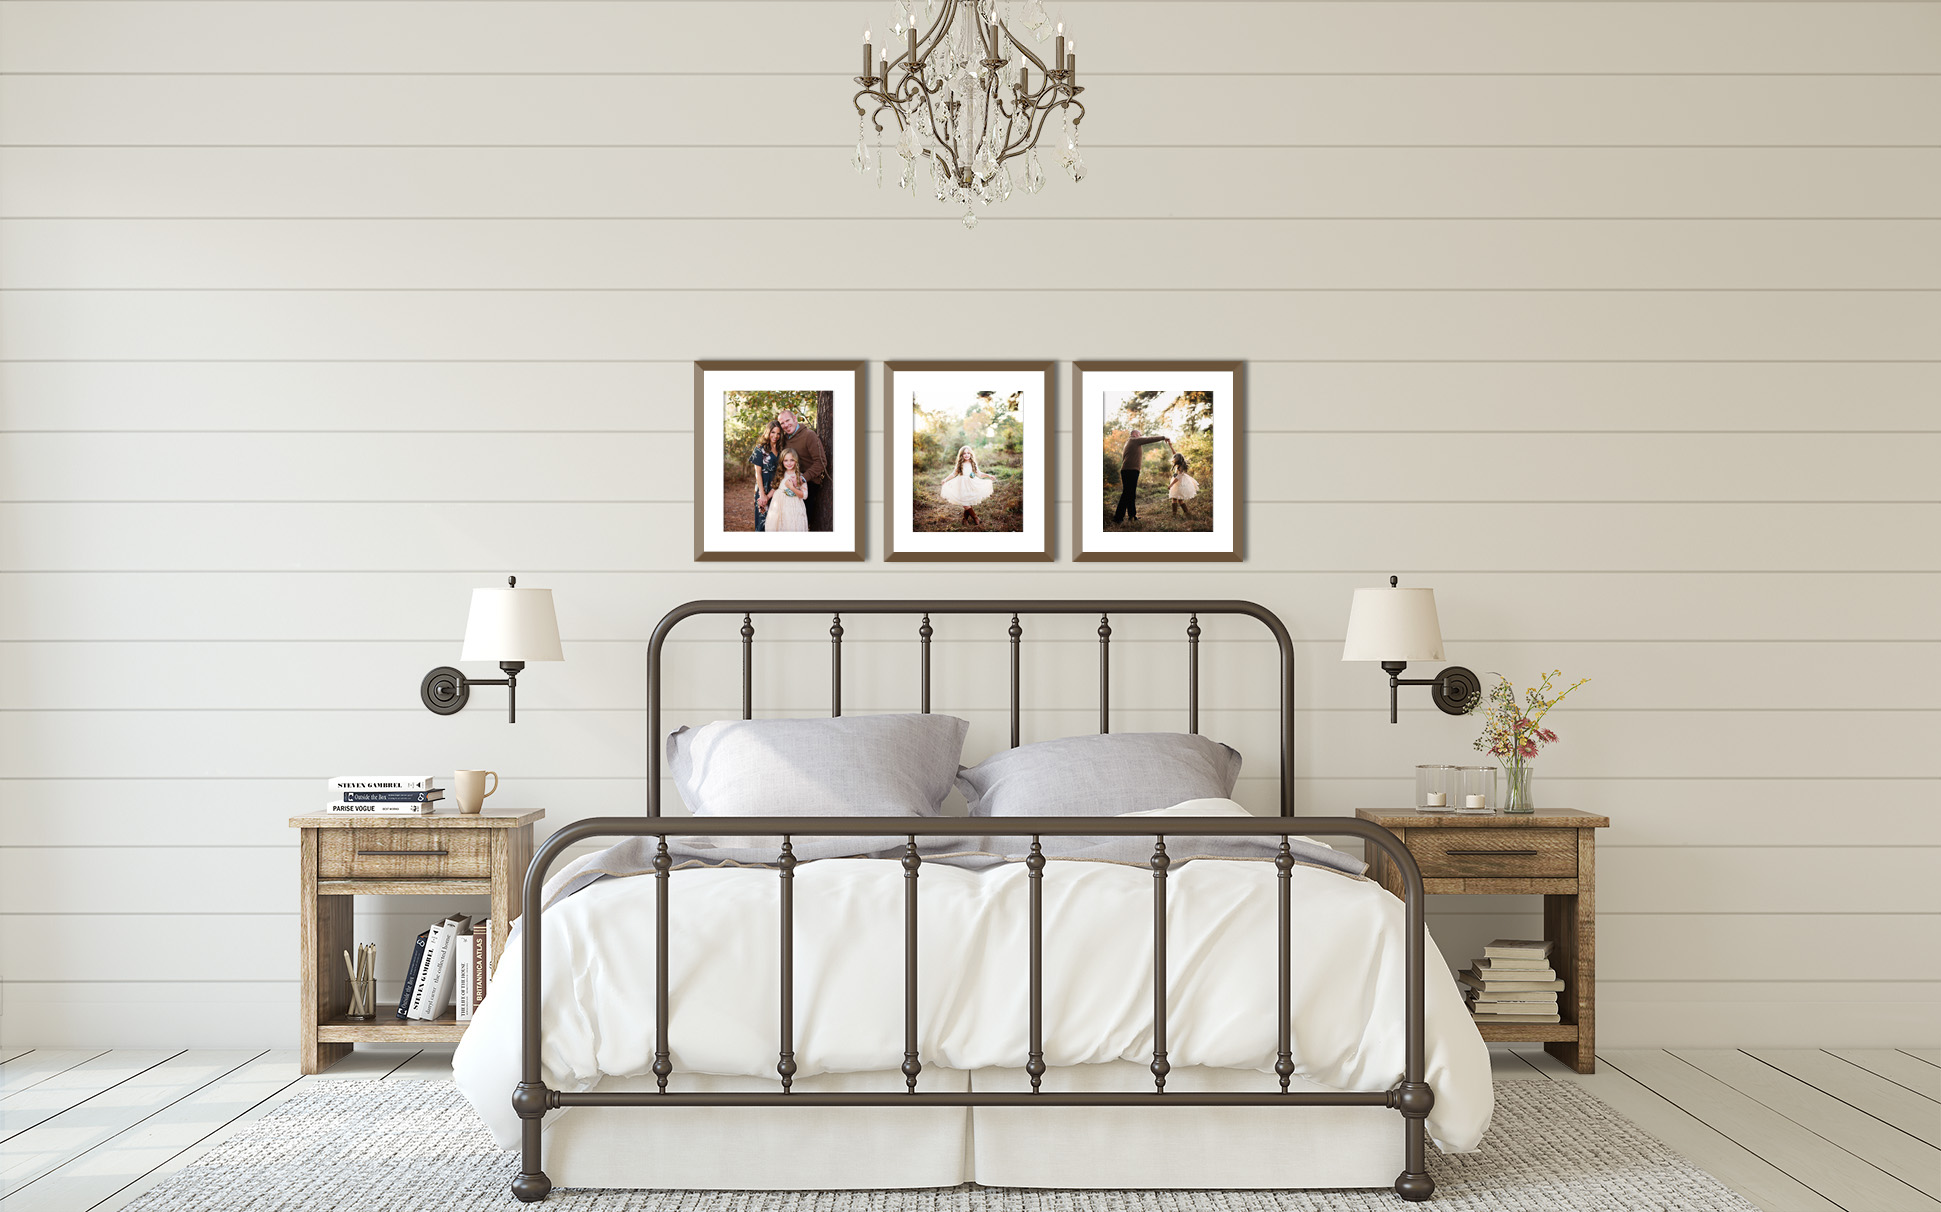 trio of framed portraits hanging above bed, wall art inspiration